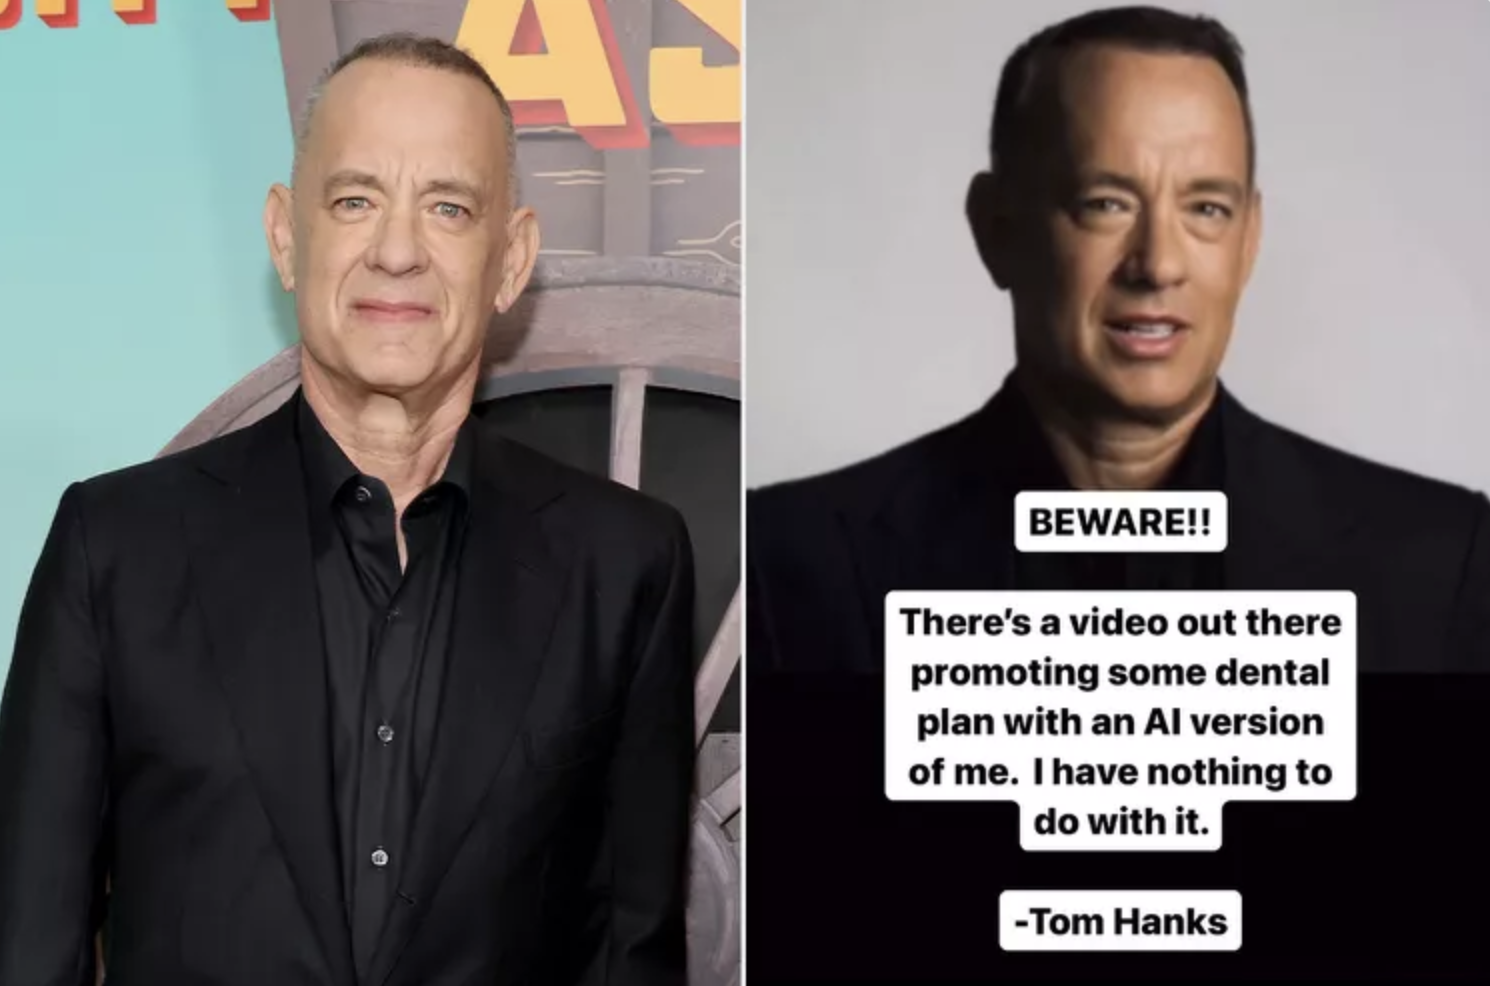 Tom Hanks Tells Followers to ‘Beware’ AI Video Promoting Dental Plan: ‘I Have Nothing to Do with It’